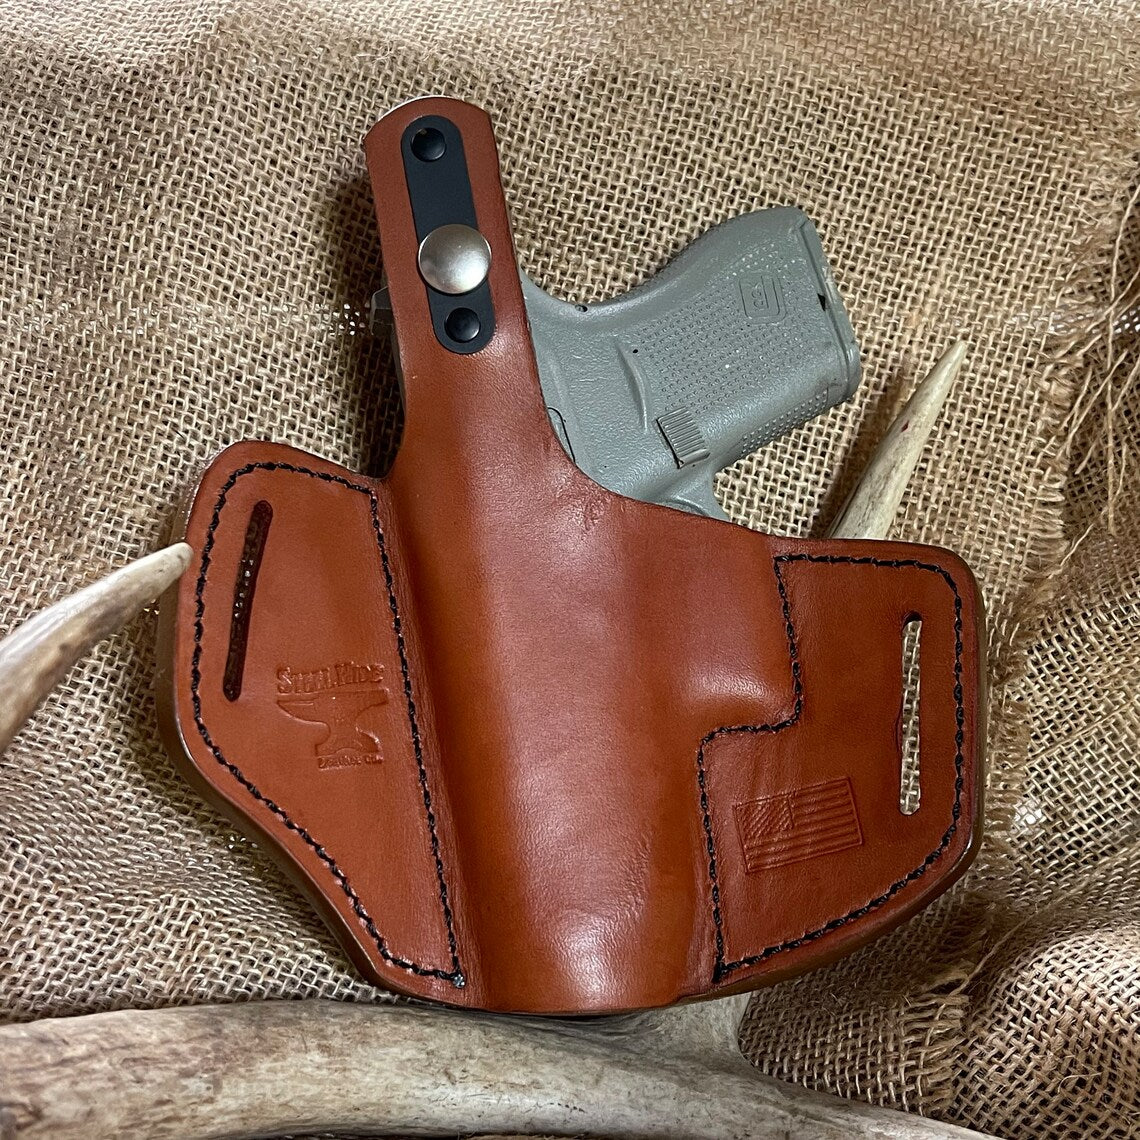 Glock 19 23 25 32 38 Thumb Break Pancake Leather Concealed Carry Holster